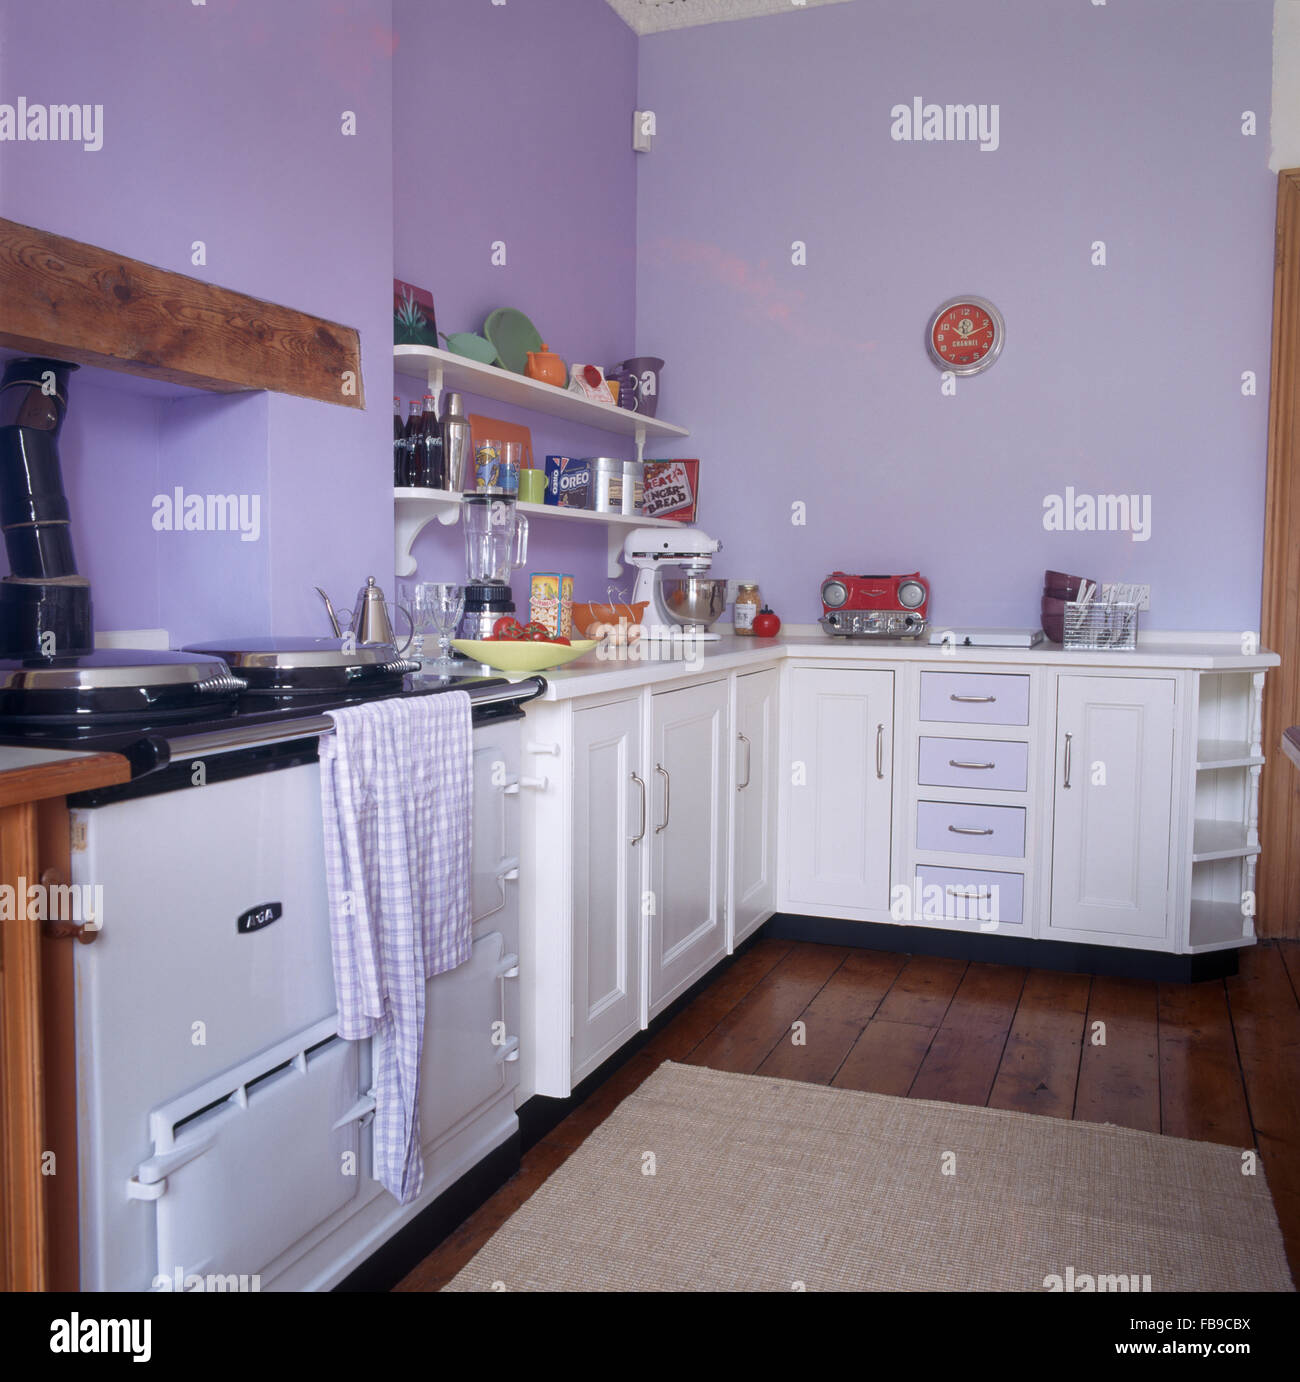 White Aga oven in pale mauve kitchen with white fitted units Stock Photo